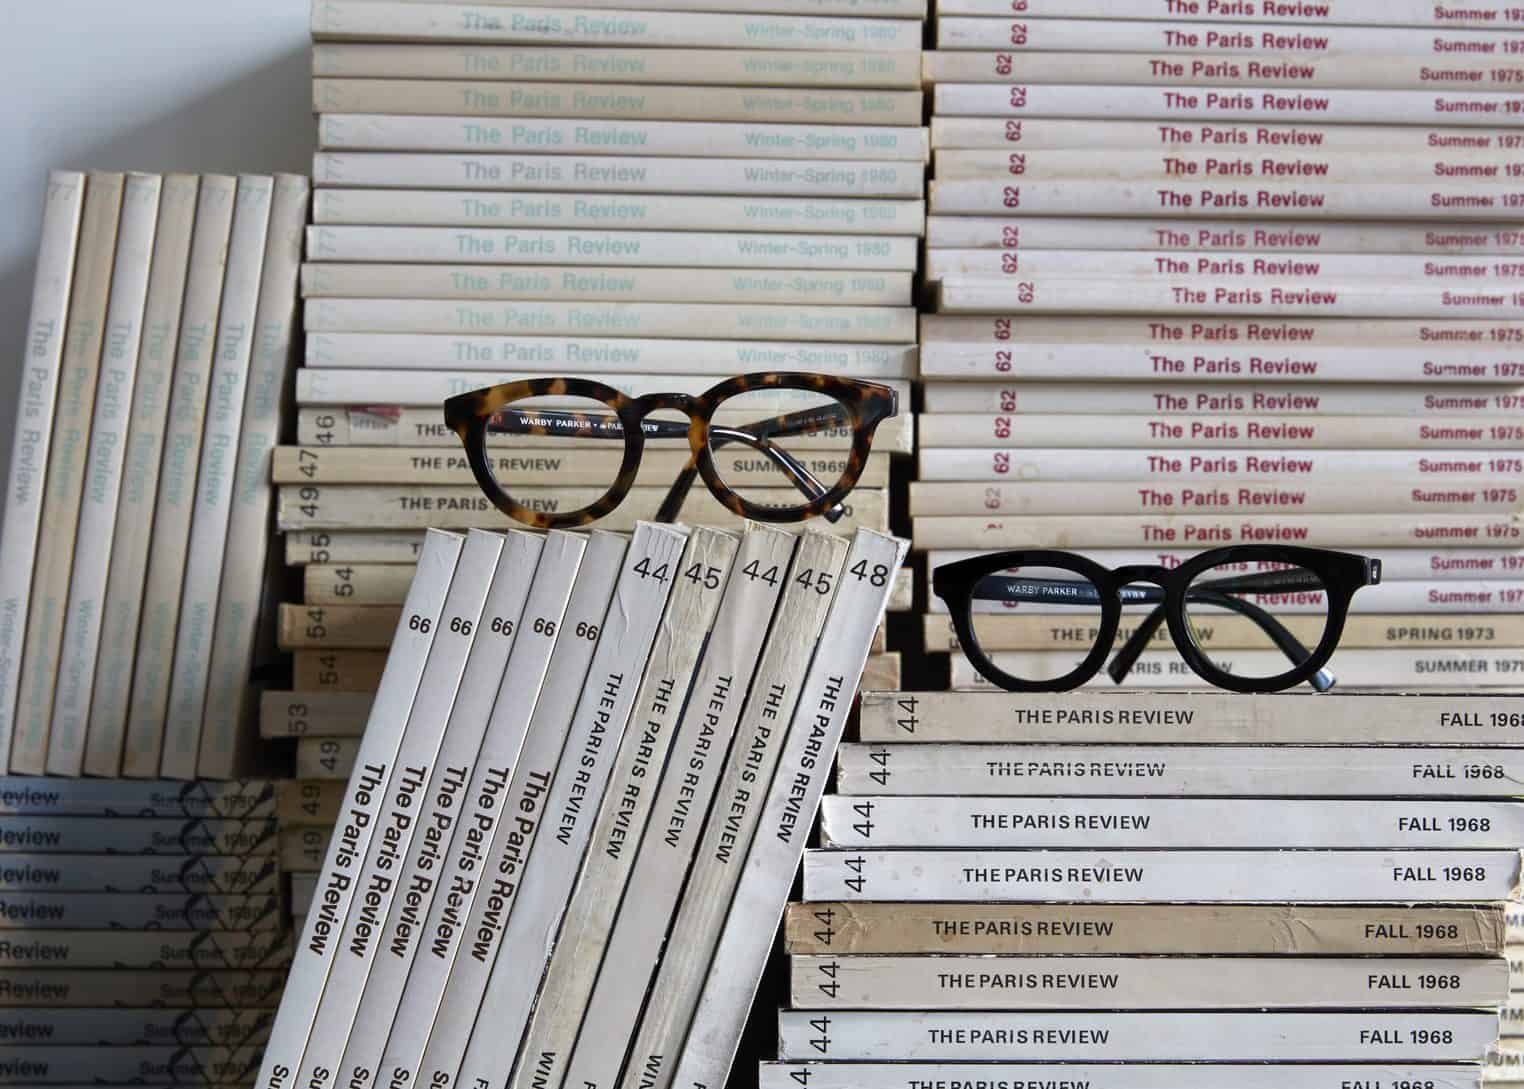 The New Warby Parker Collaboration Every Fashion Girl Will Be